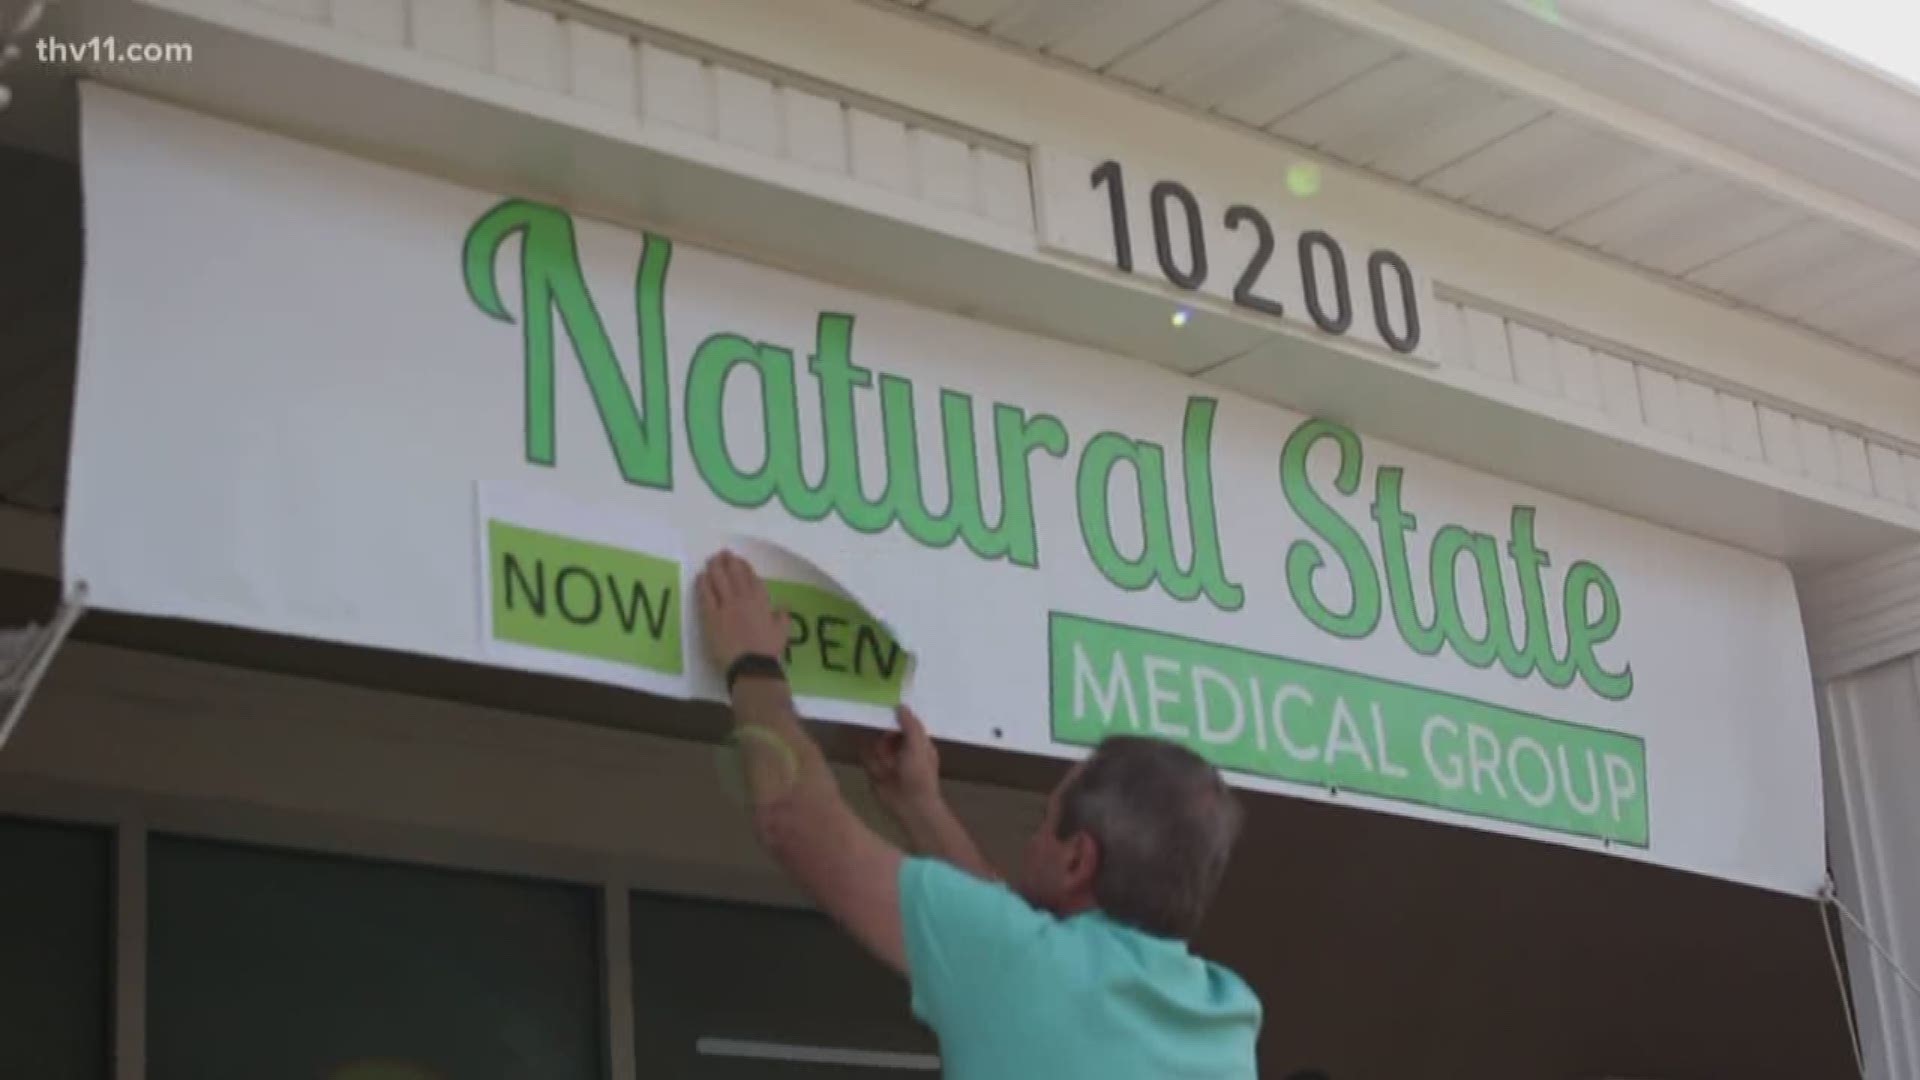 The Natural Relief Dispensary will offer a veteran discount to aid with PTSD and chronic pain.